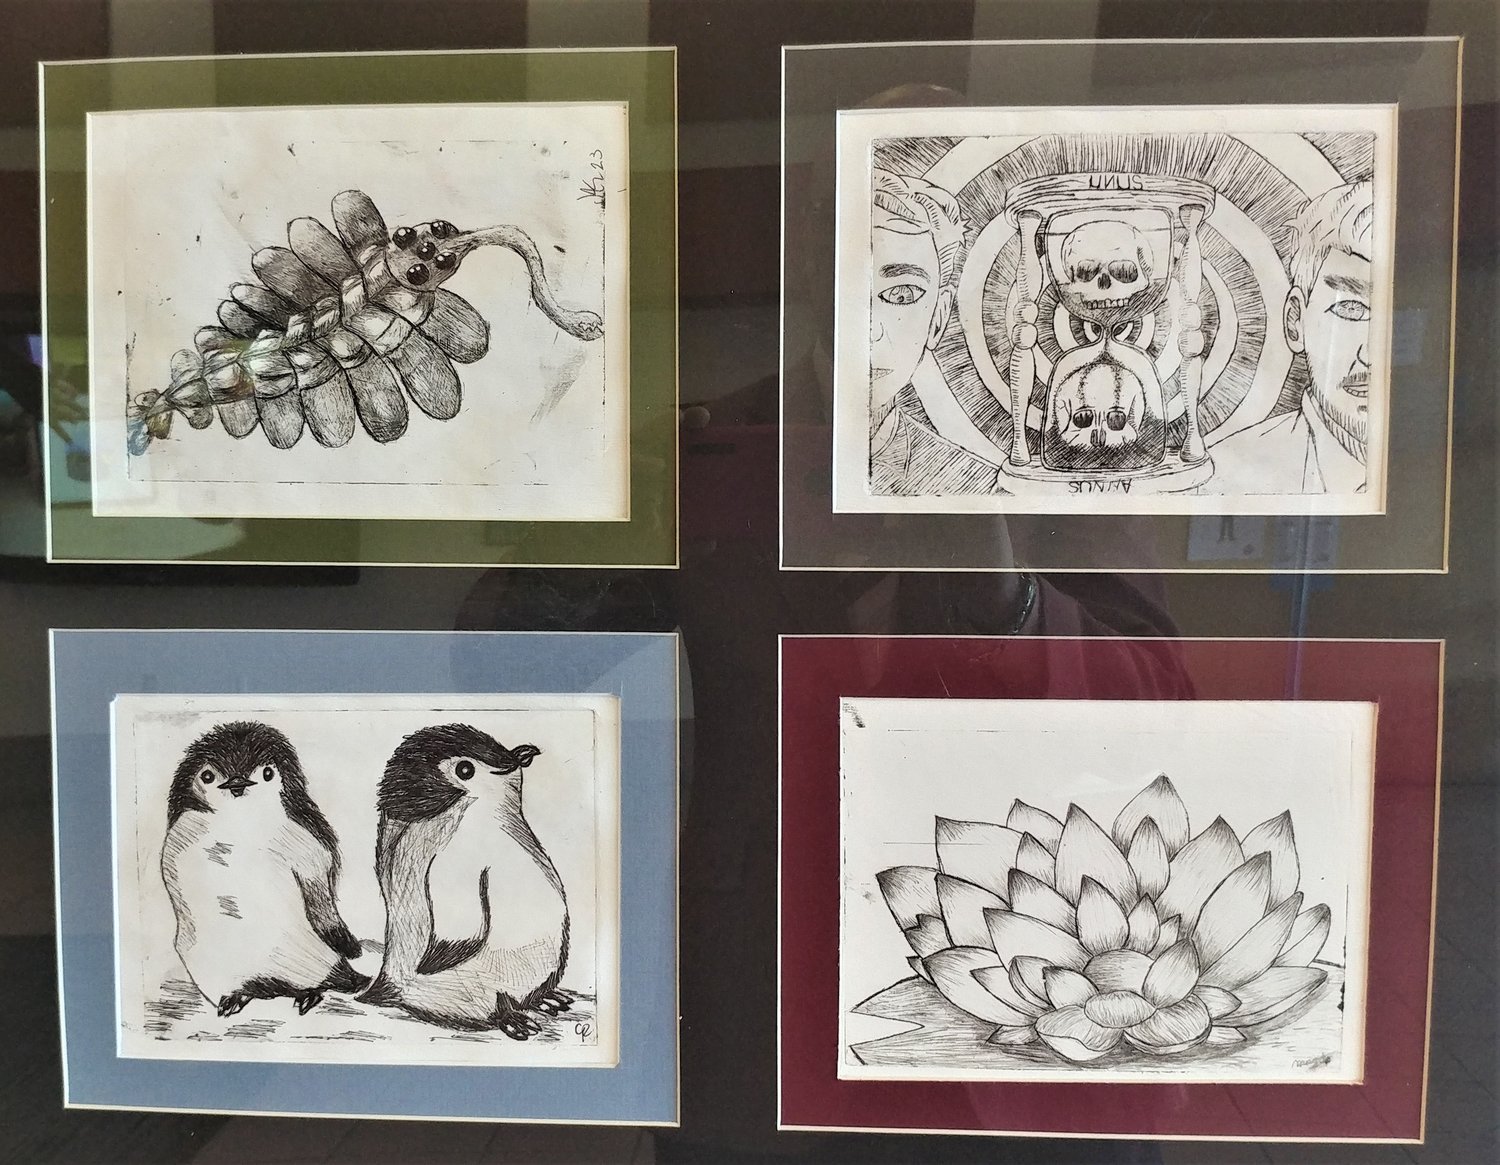 “The Magnificent Ophabinia,” by Joanie Keenes, 12th grade; “Mark and Ethan,” by Ariana Sanchez, 12th grade; “Baby Penguins,” by Ayiana Provencio, 11th grade; “Lotus Flower,” by Magdalena Saenz, 11th grade. All are students at Mayfield High School